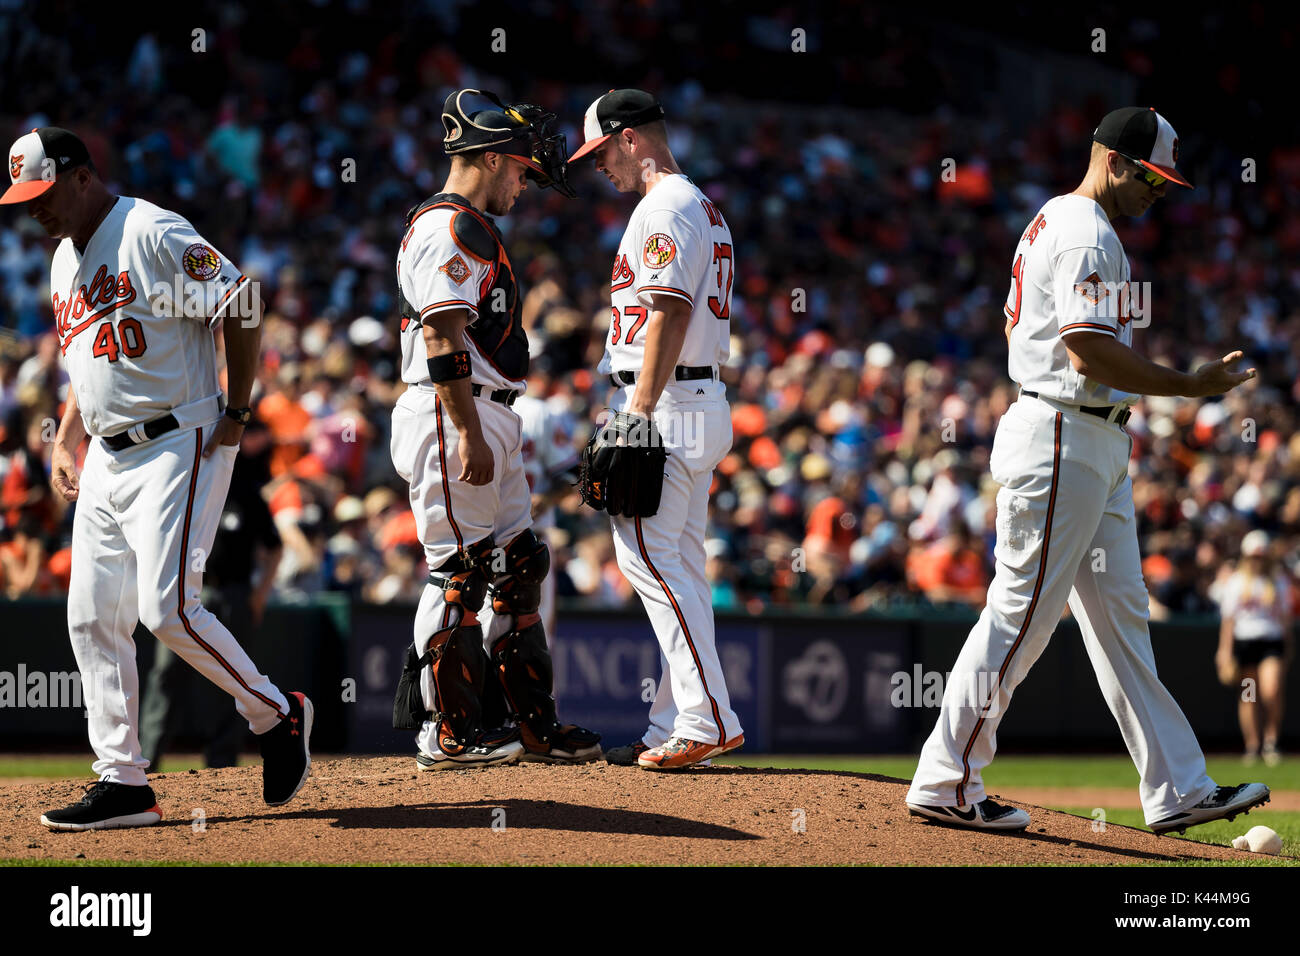 Baltimore, Maryland, USA. 04th Sep, 2017. Baltimore Orioles catcher Welington Castillo (29) visits the mound to speak with starting pitcher Dylan Bundy (37) during MLB game between New York Yankees and Baltimore Orioles at Oriole Park at Camden Yards in Baltimore, Maryland. Scott Taetsch/CSM/Alamy Live News Stock Photo